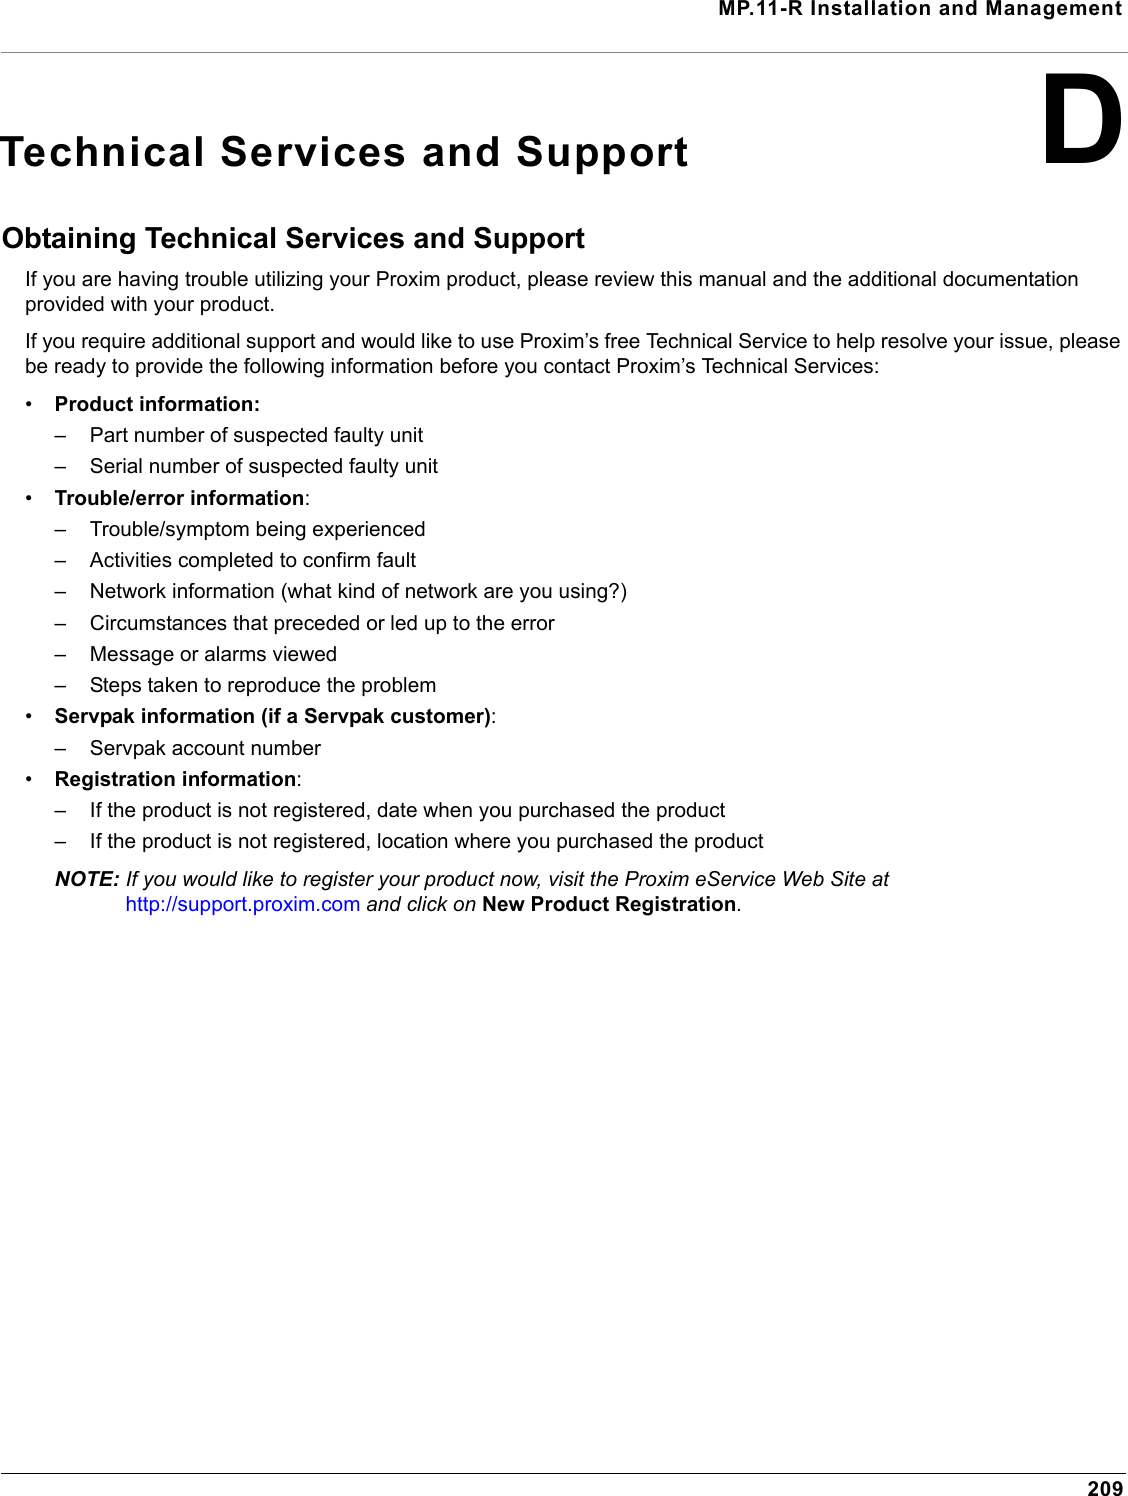 MP.11-R Installation and Management209DTechnical Services and SupportObtaining Technical Services and SupportIf you are having trouble utilizing your Proxim product, please review this manual and the additional documentation provided with your product. If you require additional support and would like to use Proxim’s free Technical Service to help resolve your issue, please be ready to provide the following information before you contact Proxim’s Technical Services: •Product information:– Part number of suspected faulty unit– Serial number of suspected faulty unit•Trouble/error information:– Trouble/symptom being experienced– Activities completed to confirm fault– Network information (what kind of network are you using?)– Circumstances that preceded or led up to the error– Message or alarms viewed– Steps taken to reproduce the problem•Servpak information (if a Servpak customer):– Servpak account number•Registration information:– If the product is not registered, date when you purchased the product– If the product is not registered, location where you purchased the productNOTE: If you would like to register your product now, visit the Proxim eService Web Site at  http://support.proxim.com and click on New Product Registration.